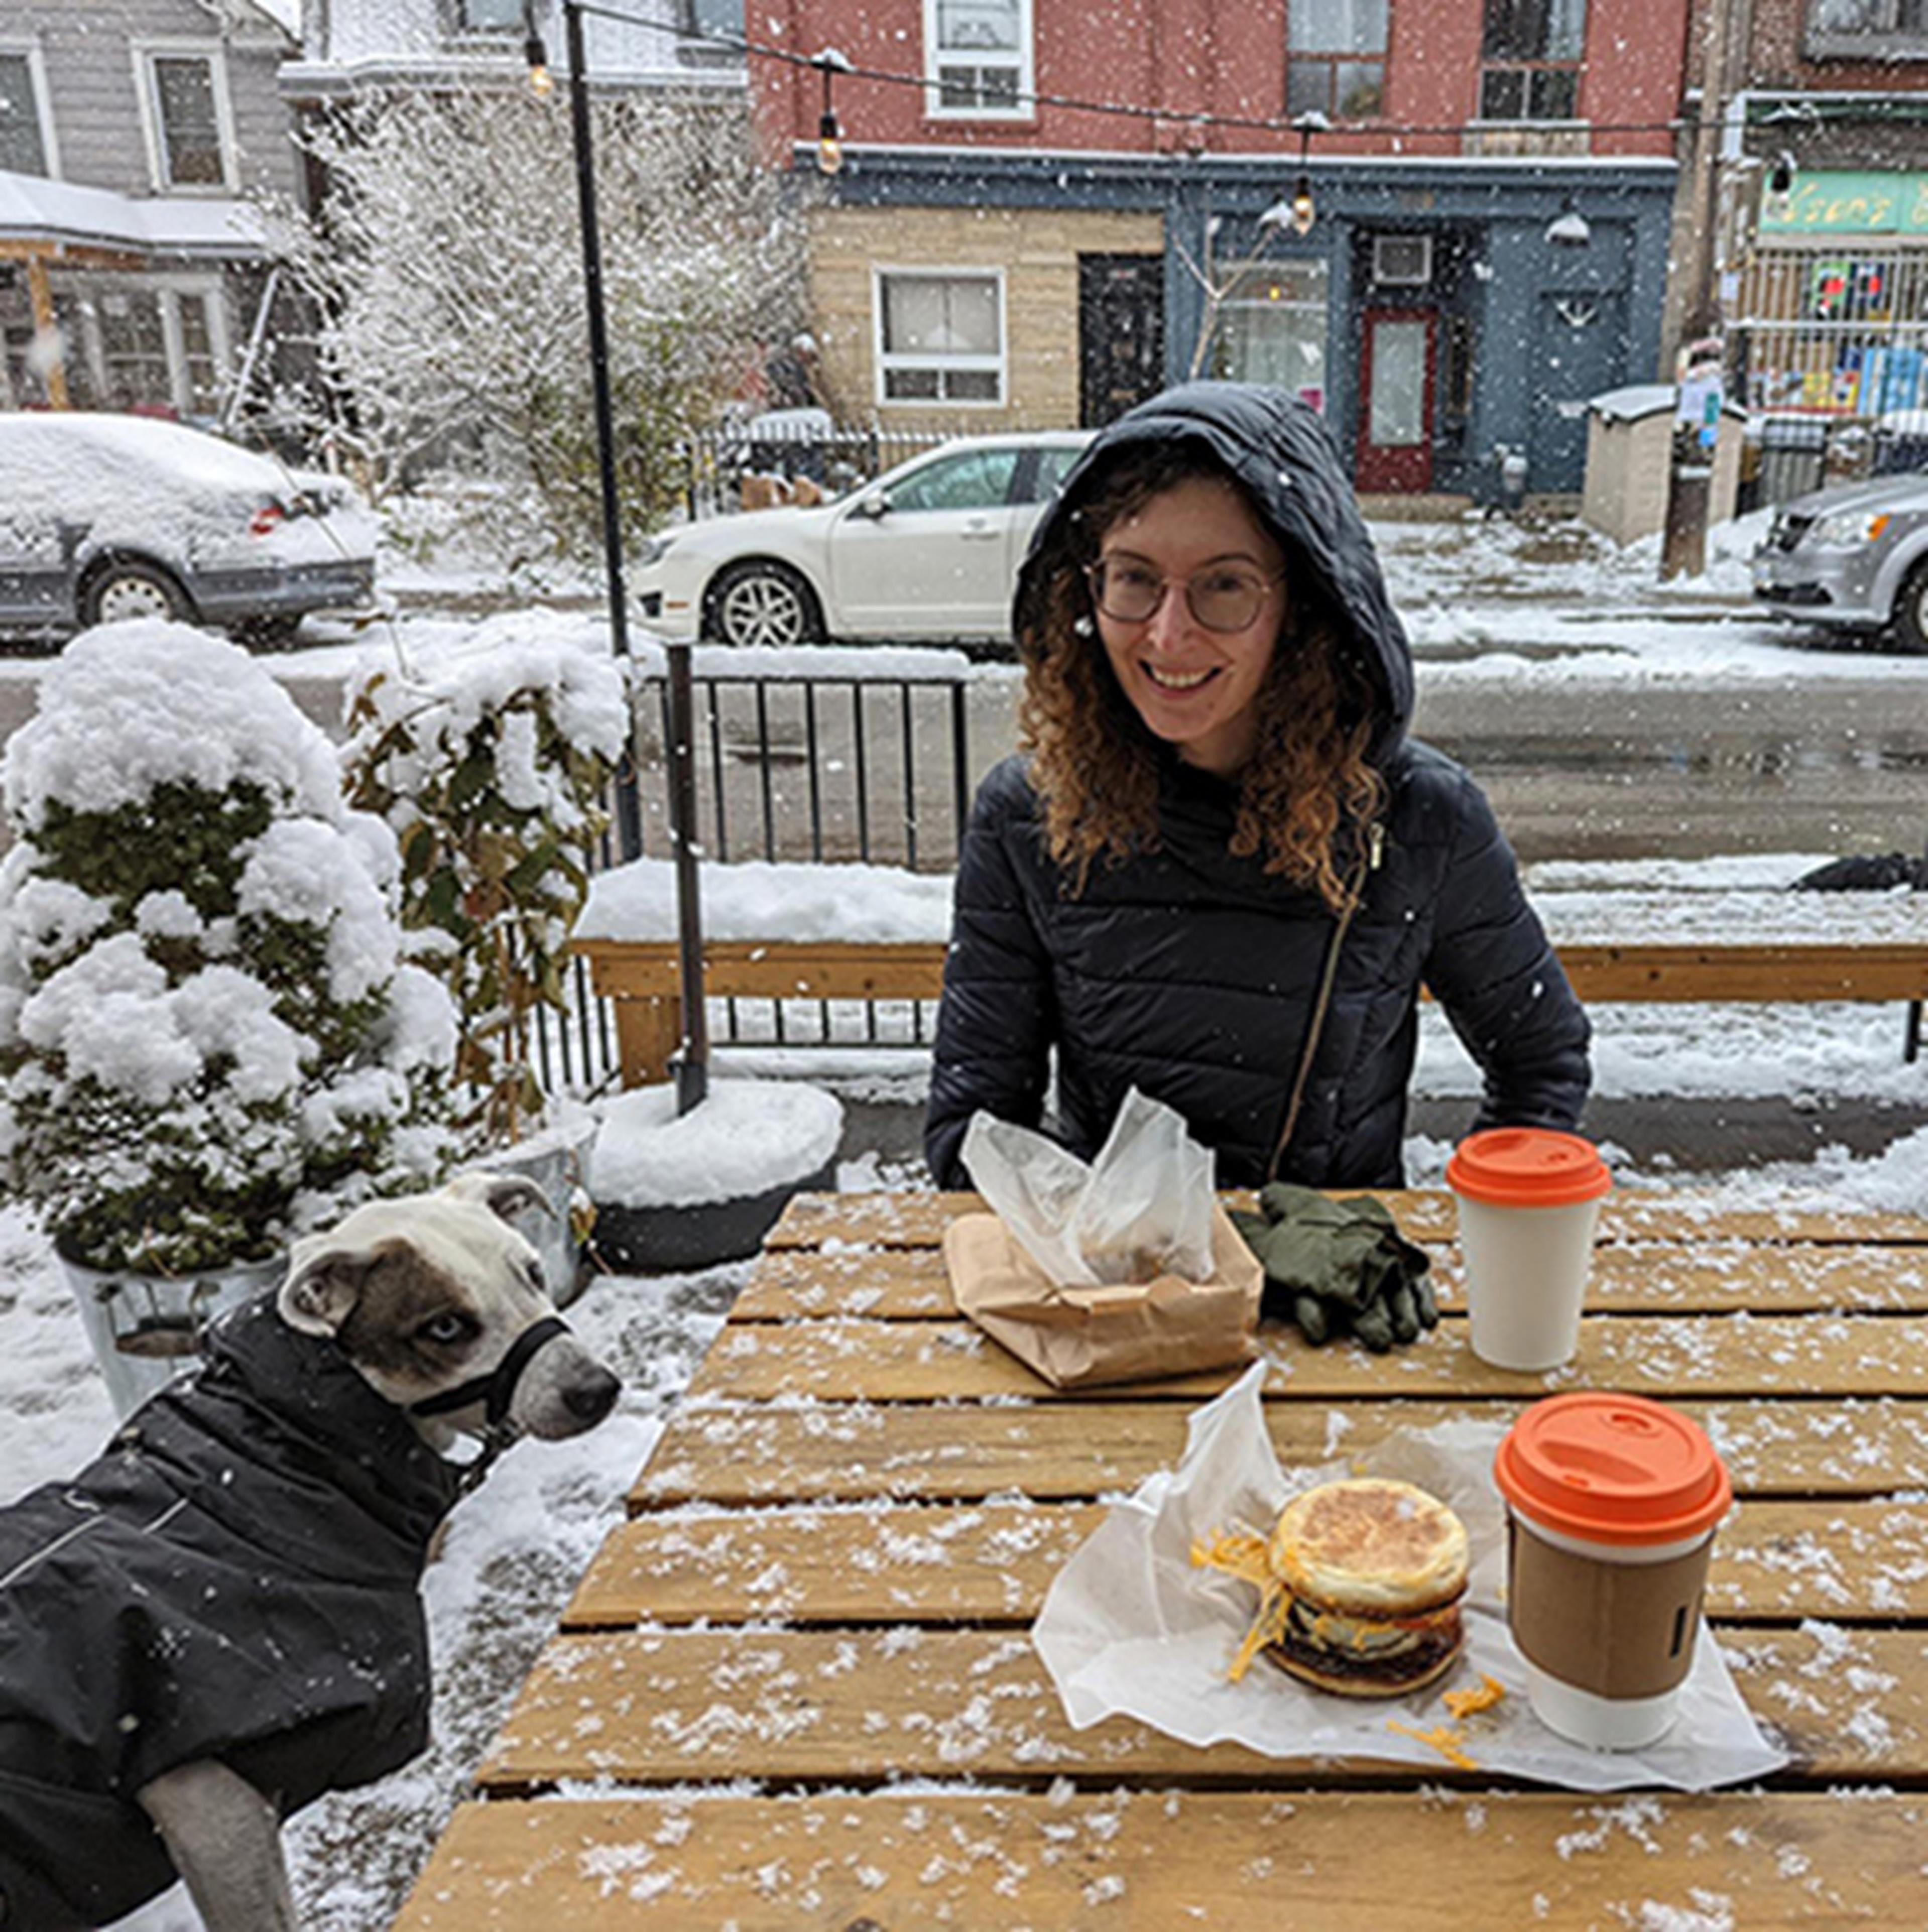 Madison sitting at an outdoor table in the winter with a cup of coffee and a dog